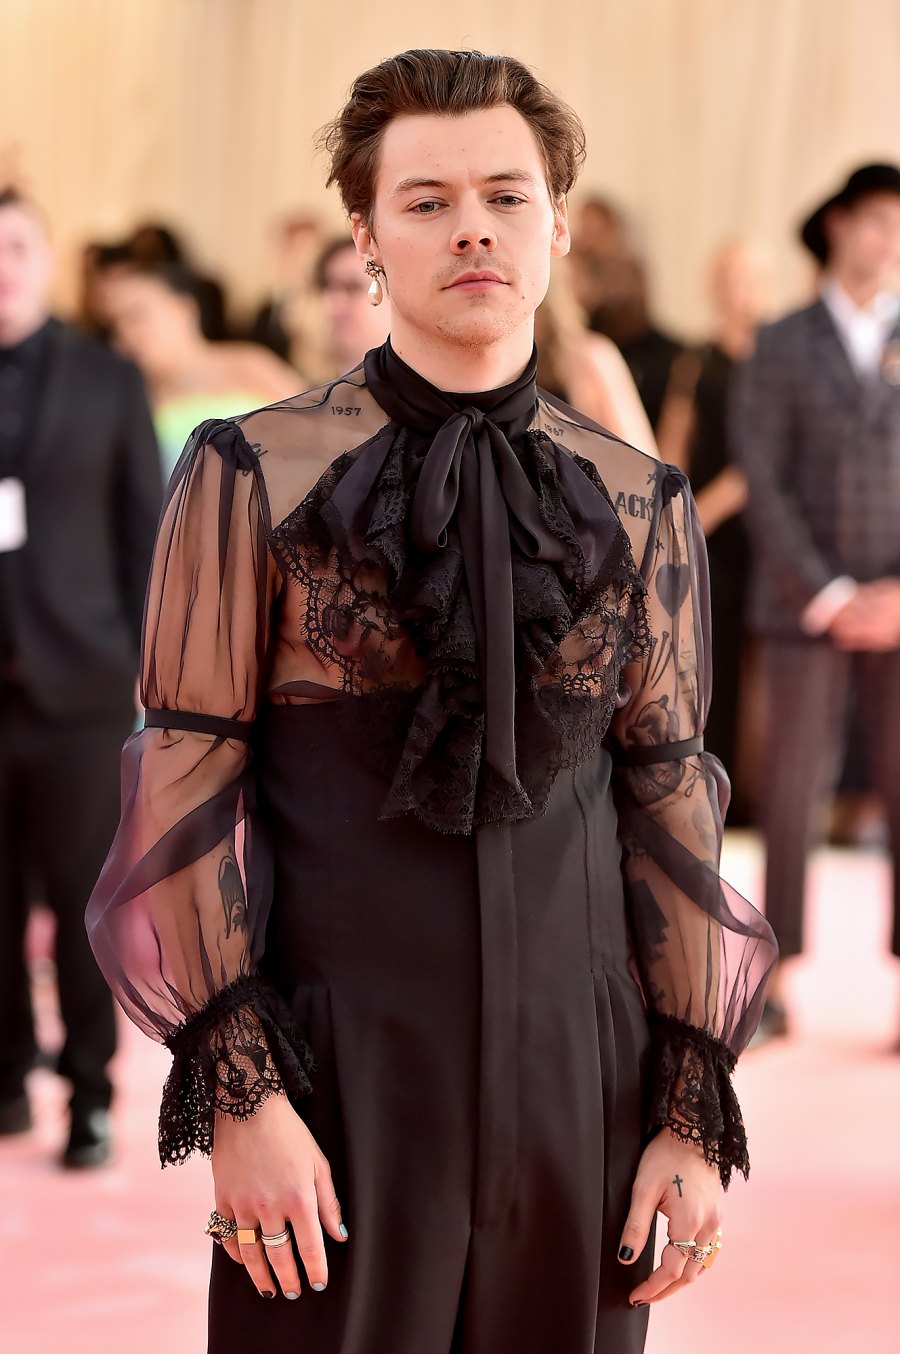 Celebrity Men Who've Rocked Sheer Shirts on the Red Carpet: Harry Styles, ASAP Rocky and More